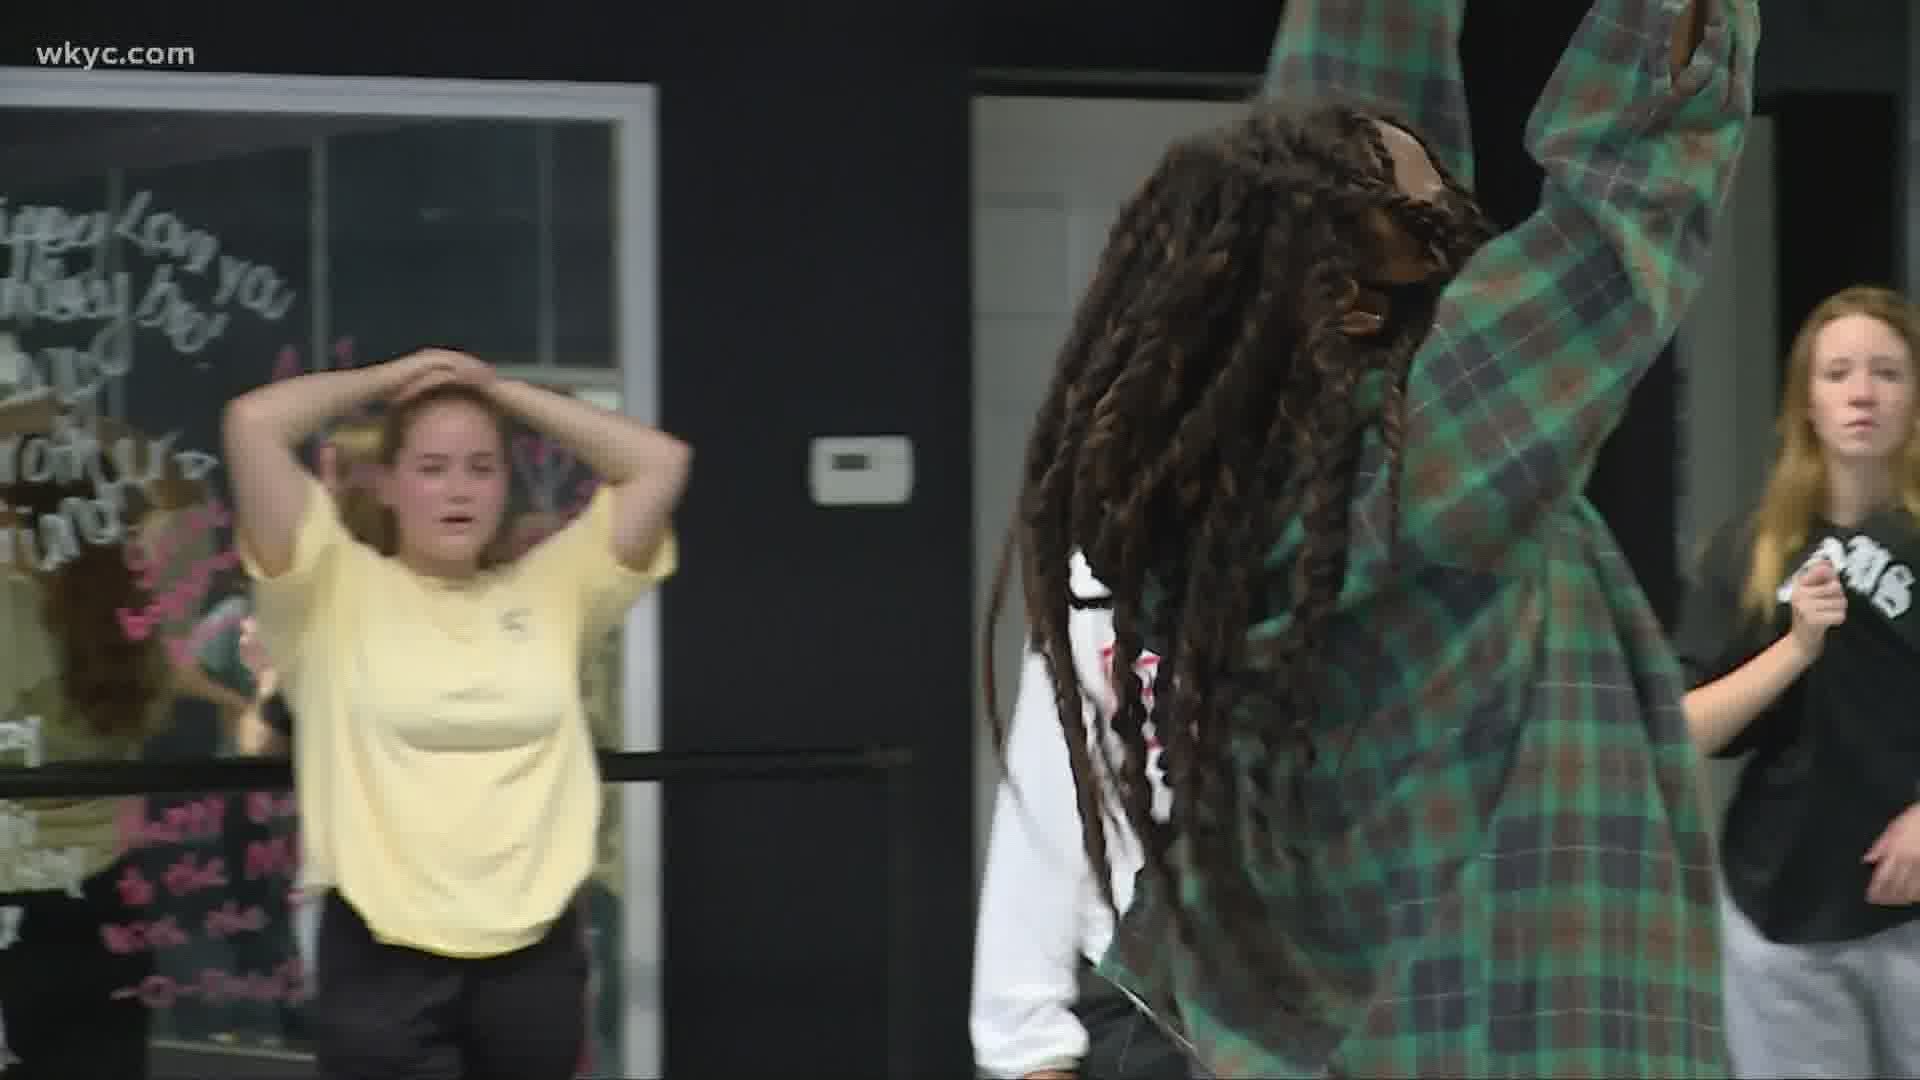 Elevated Dance Headquarters has many dance classes and programs, but their latest endeavor targets those who may need it most. Will Ujek reports.